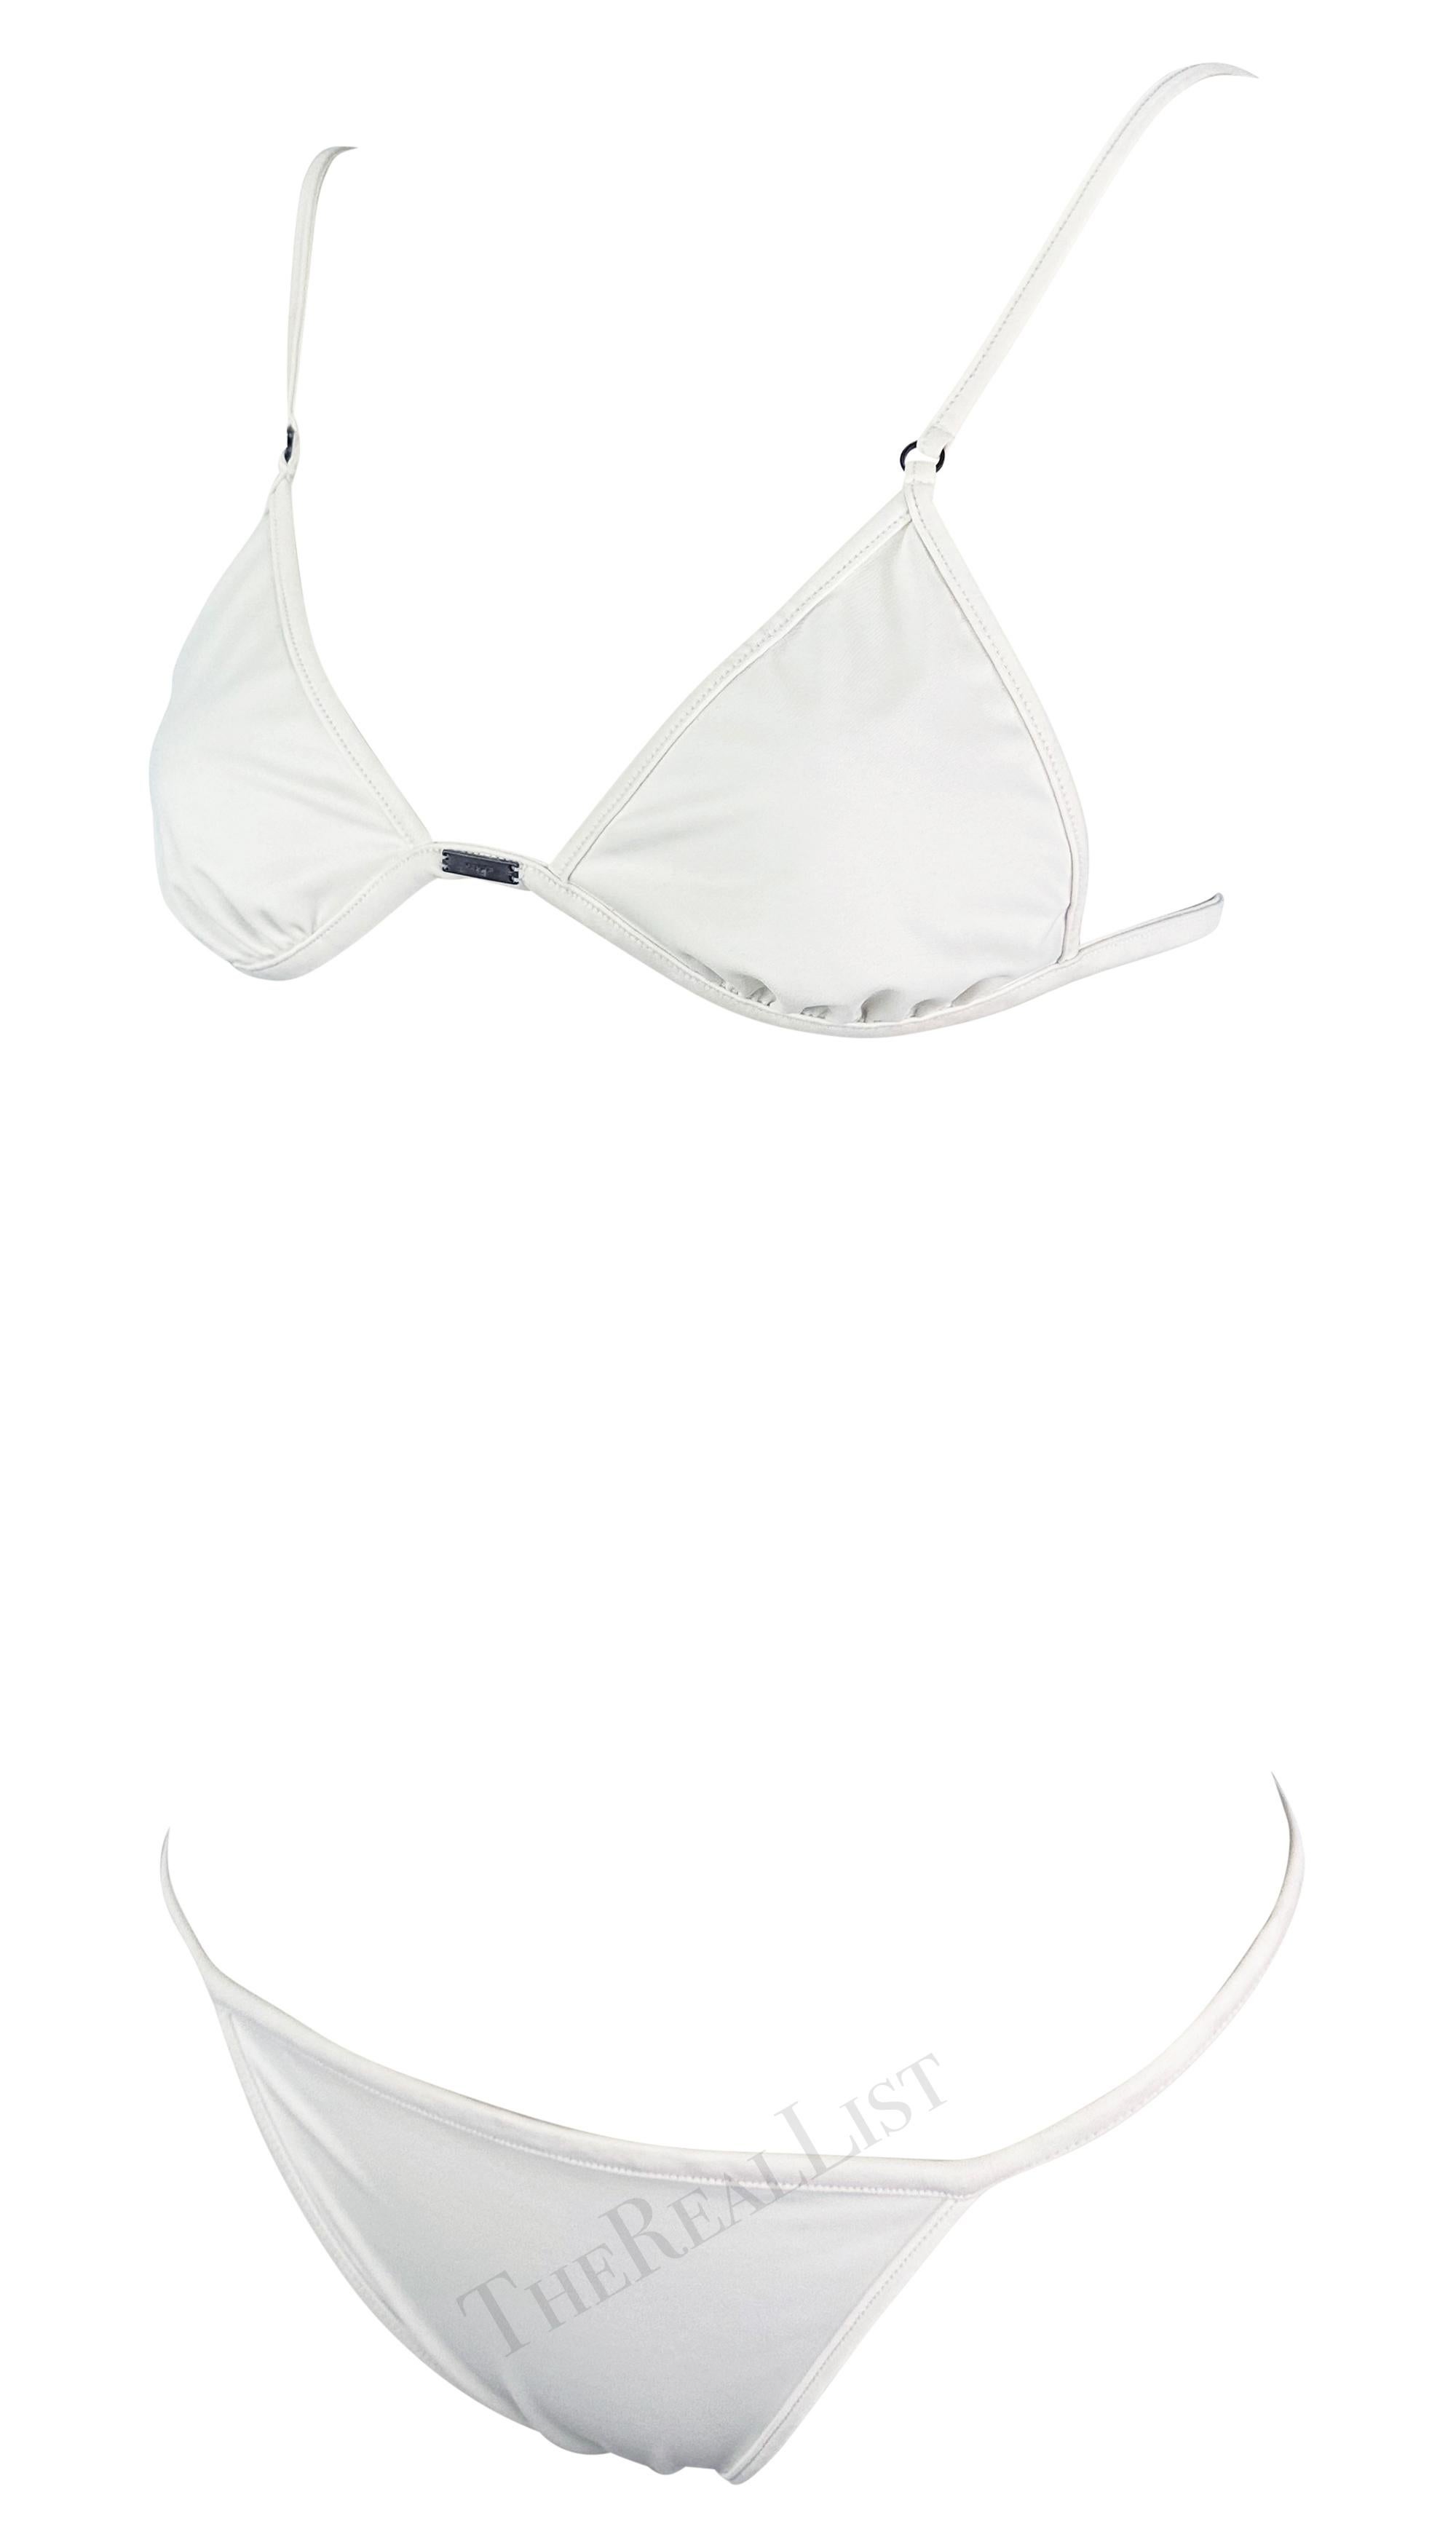 S/S 2001 Gucci by Tom Ford White Bikini Two-Piece Swimsuit Set In Good Condition For Sale In West Hollywood, CA